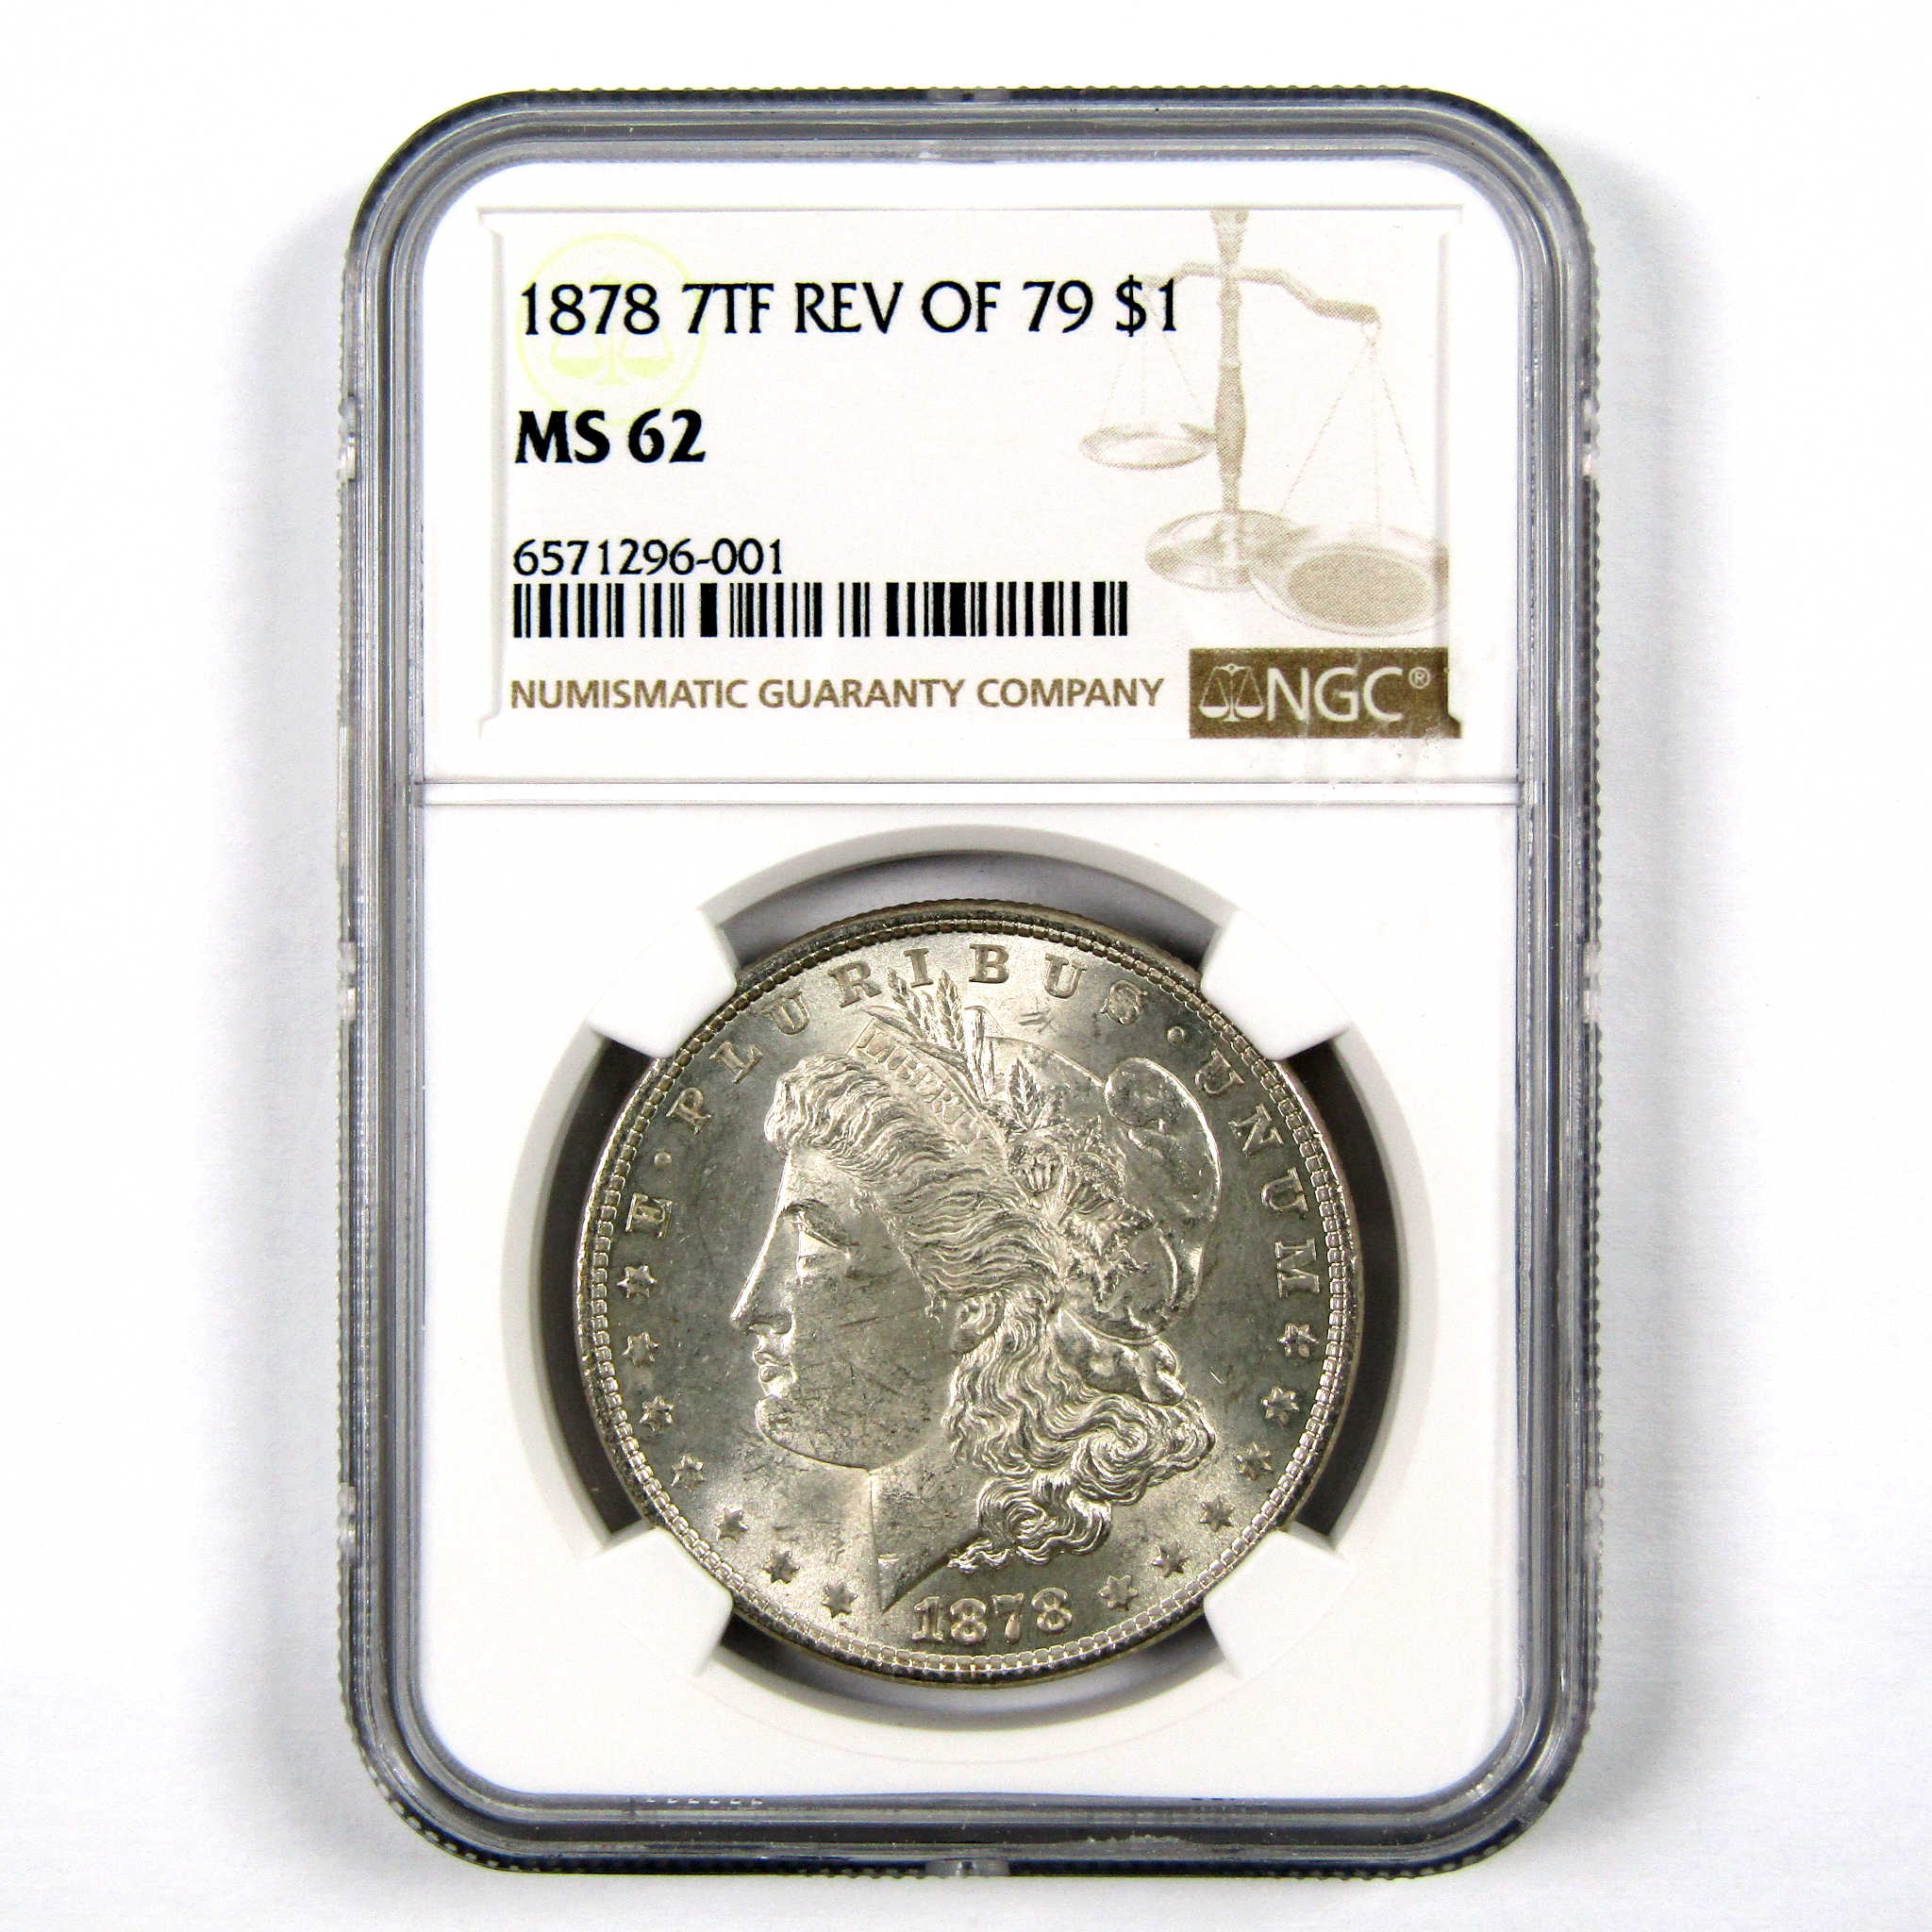 1878 7TF Rev 79 Morgan Dollar MS 62 NGC 90% Silver $1 Unc SKU:I9219 - Morgan coin - Morgan silver dollar - Morgan silver dollar for sale - Profile Coins &amp; Collectibles